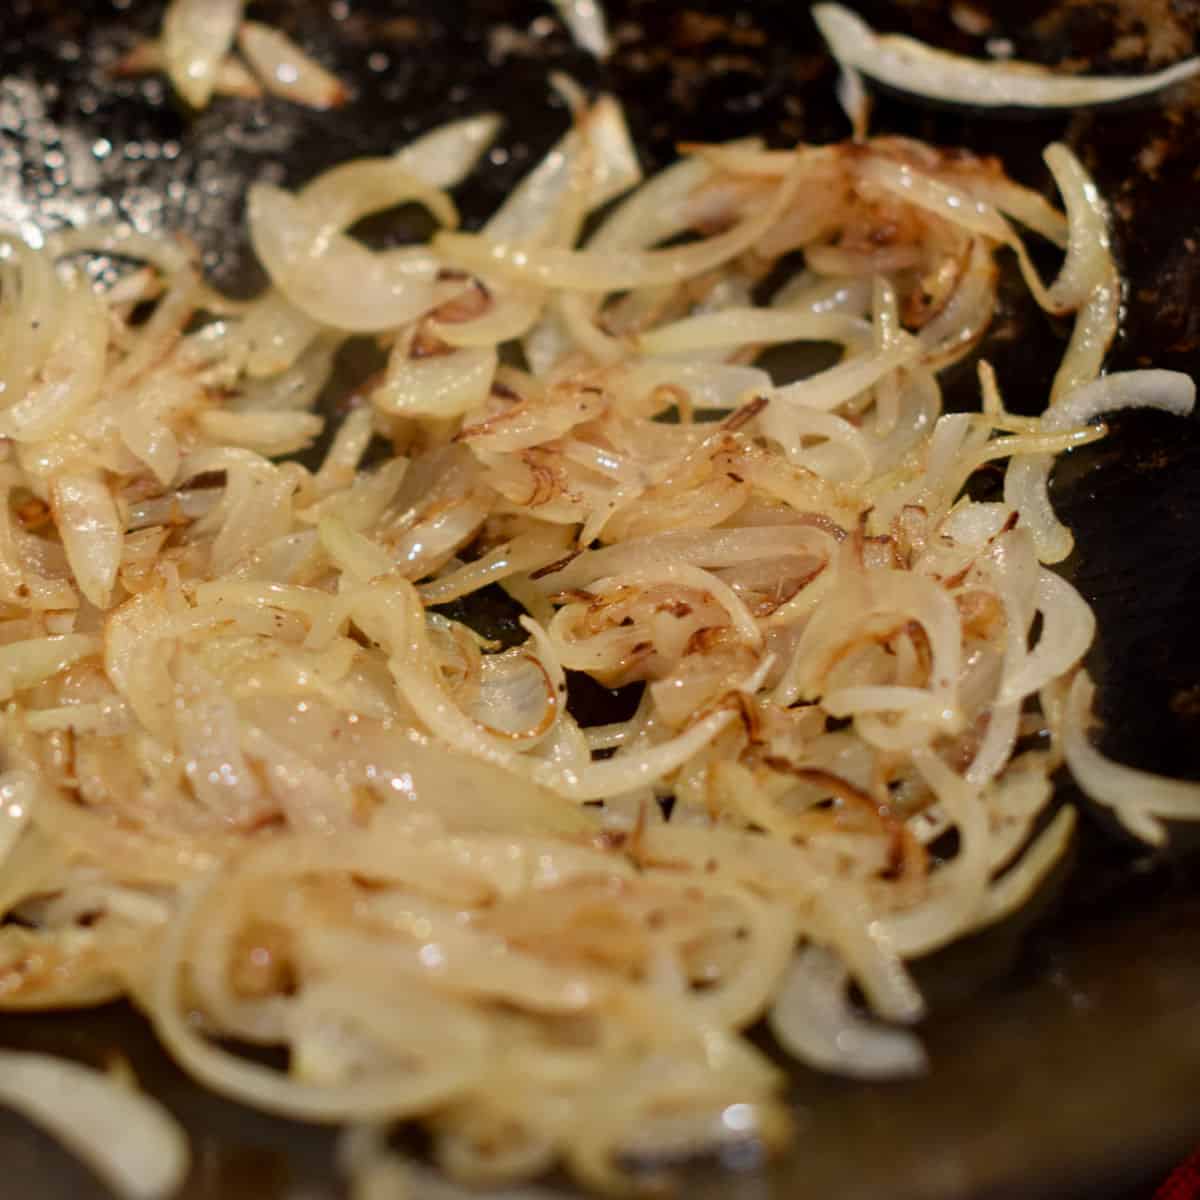 Onions in a pan with nicely browned edges.